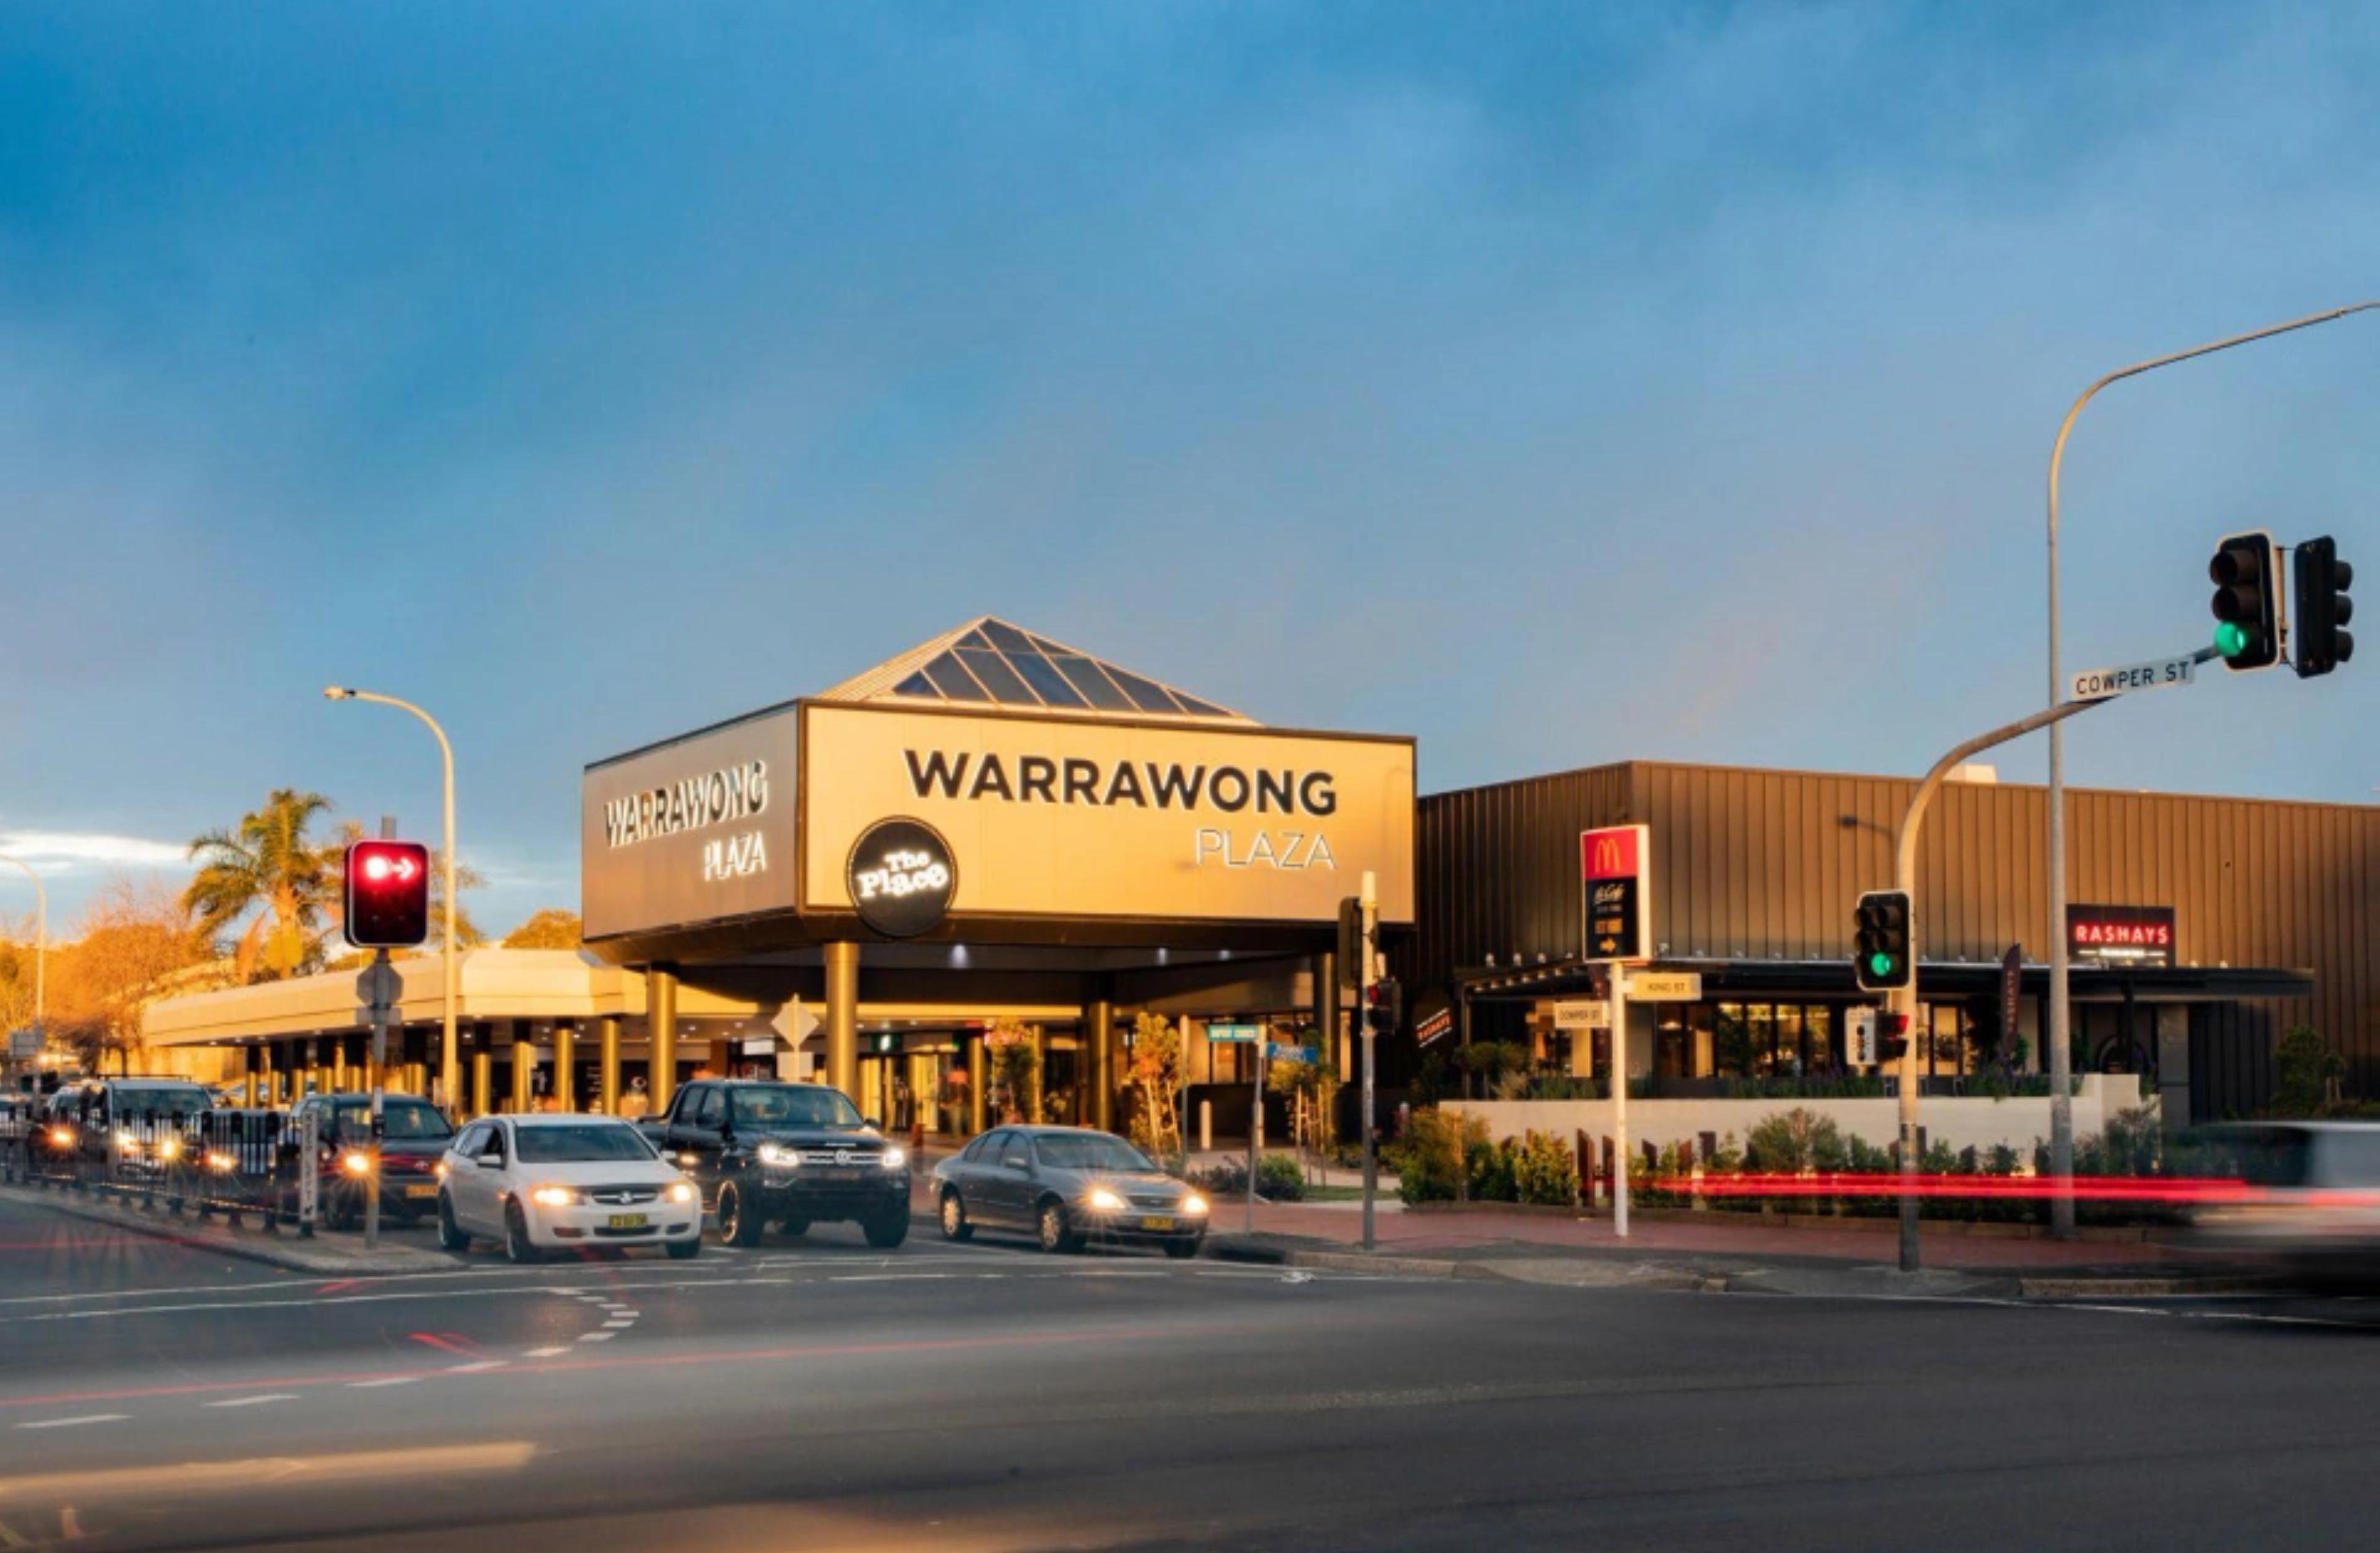 Jasper releases its first Marketplace Offer - Warrawong Plaza